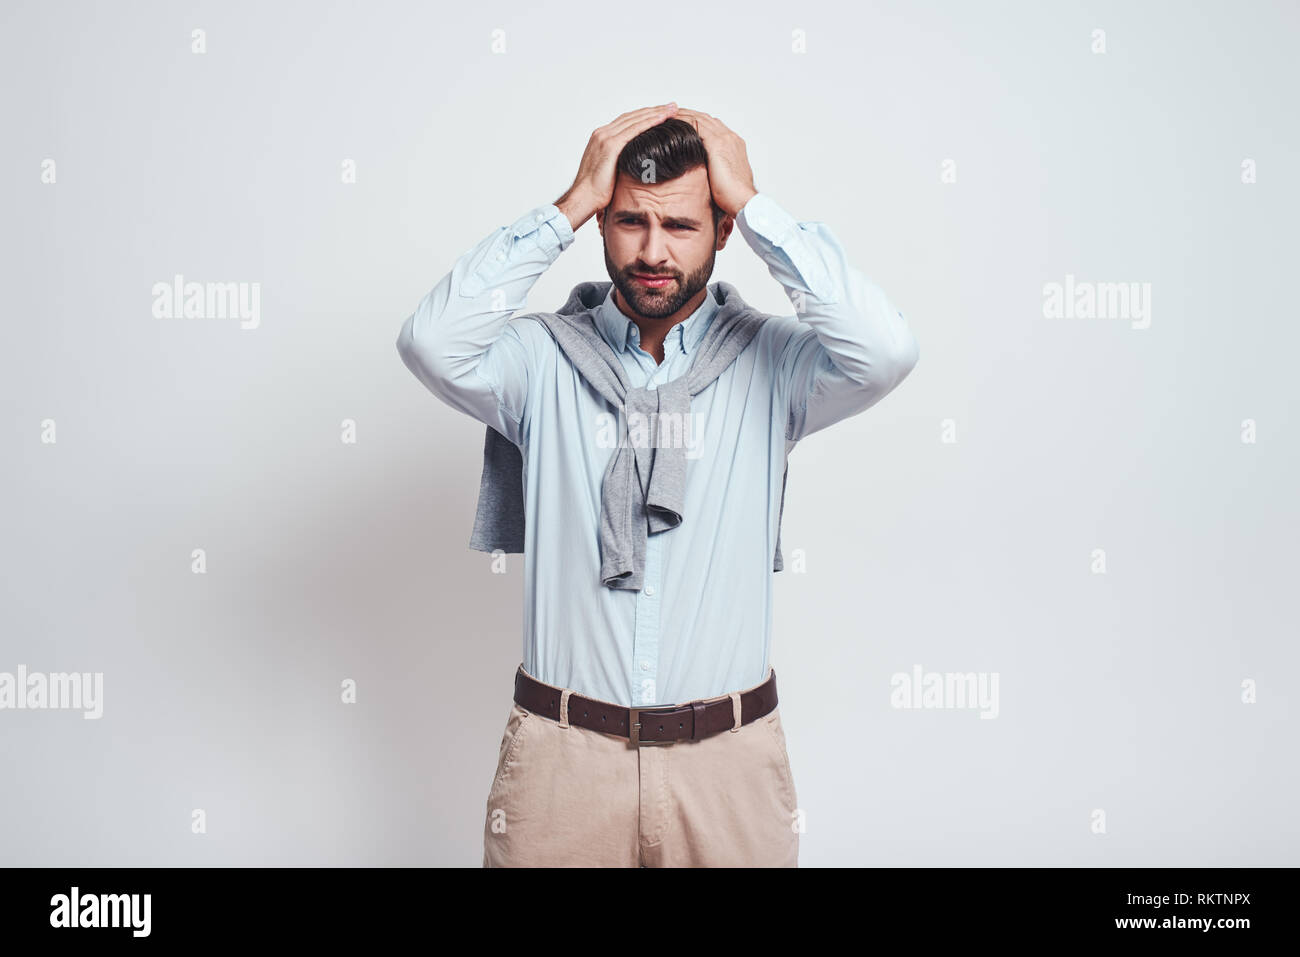 Emotional stress. Close-up portrait of confused young man keeping head in his hands and making a sad emotion while standing against grey background. Stress concept. Emotion expression. Stock Photo